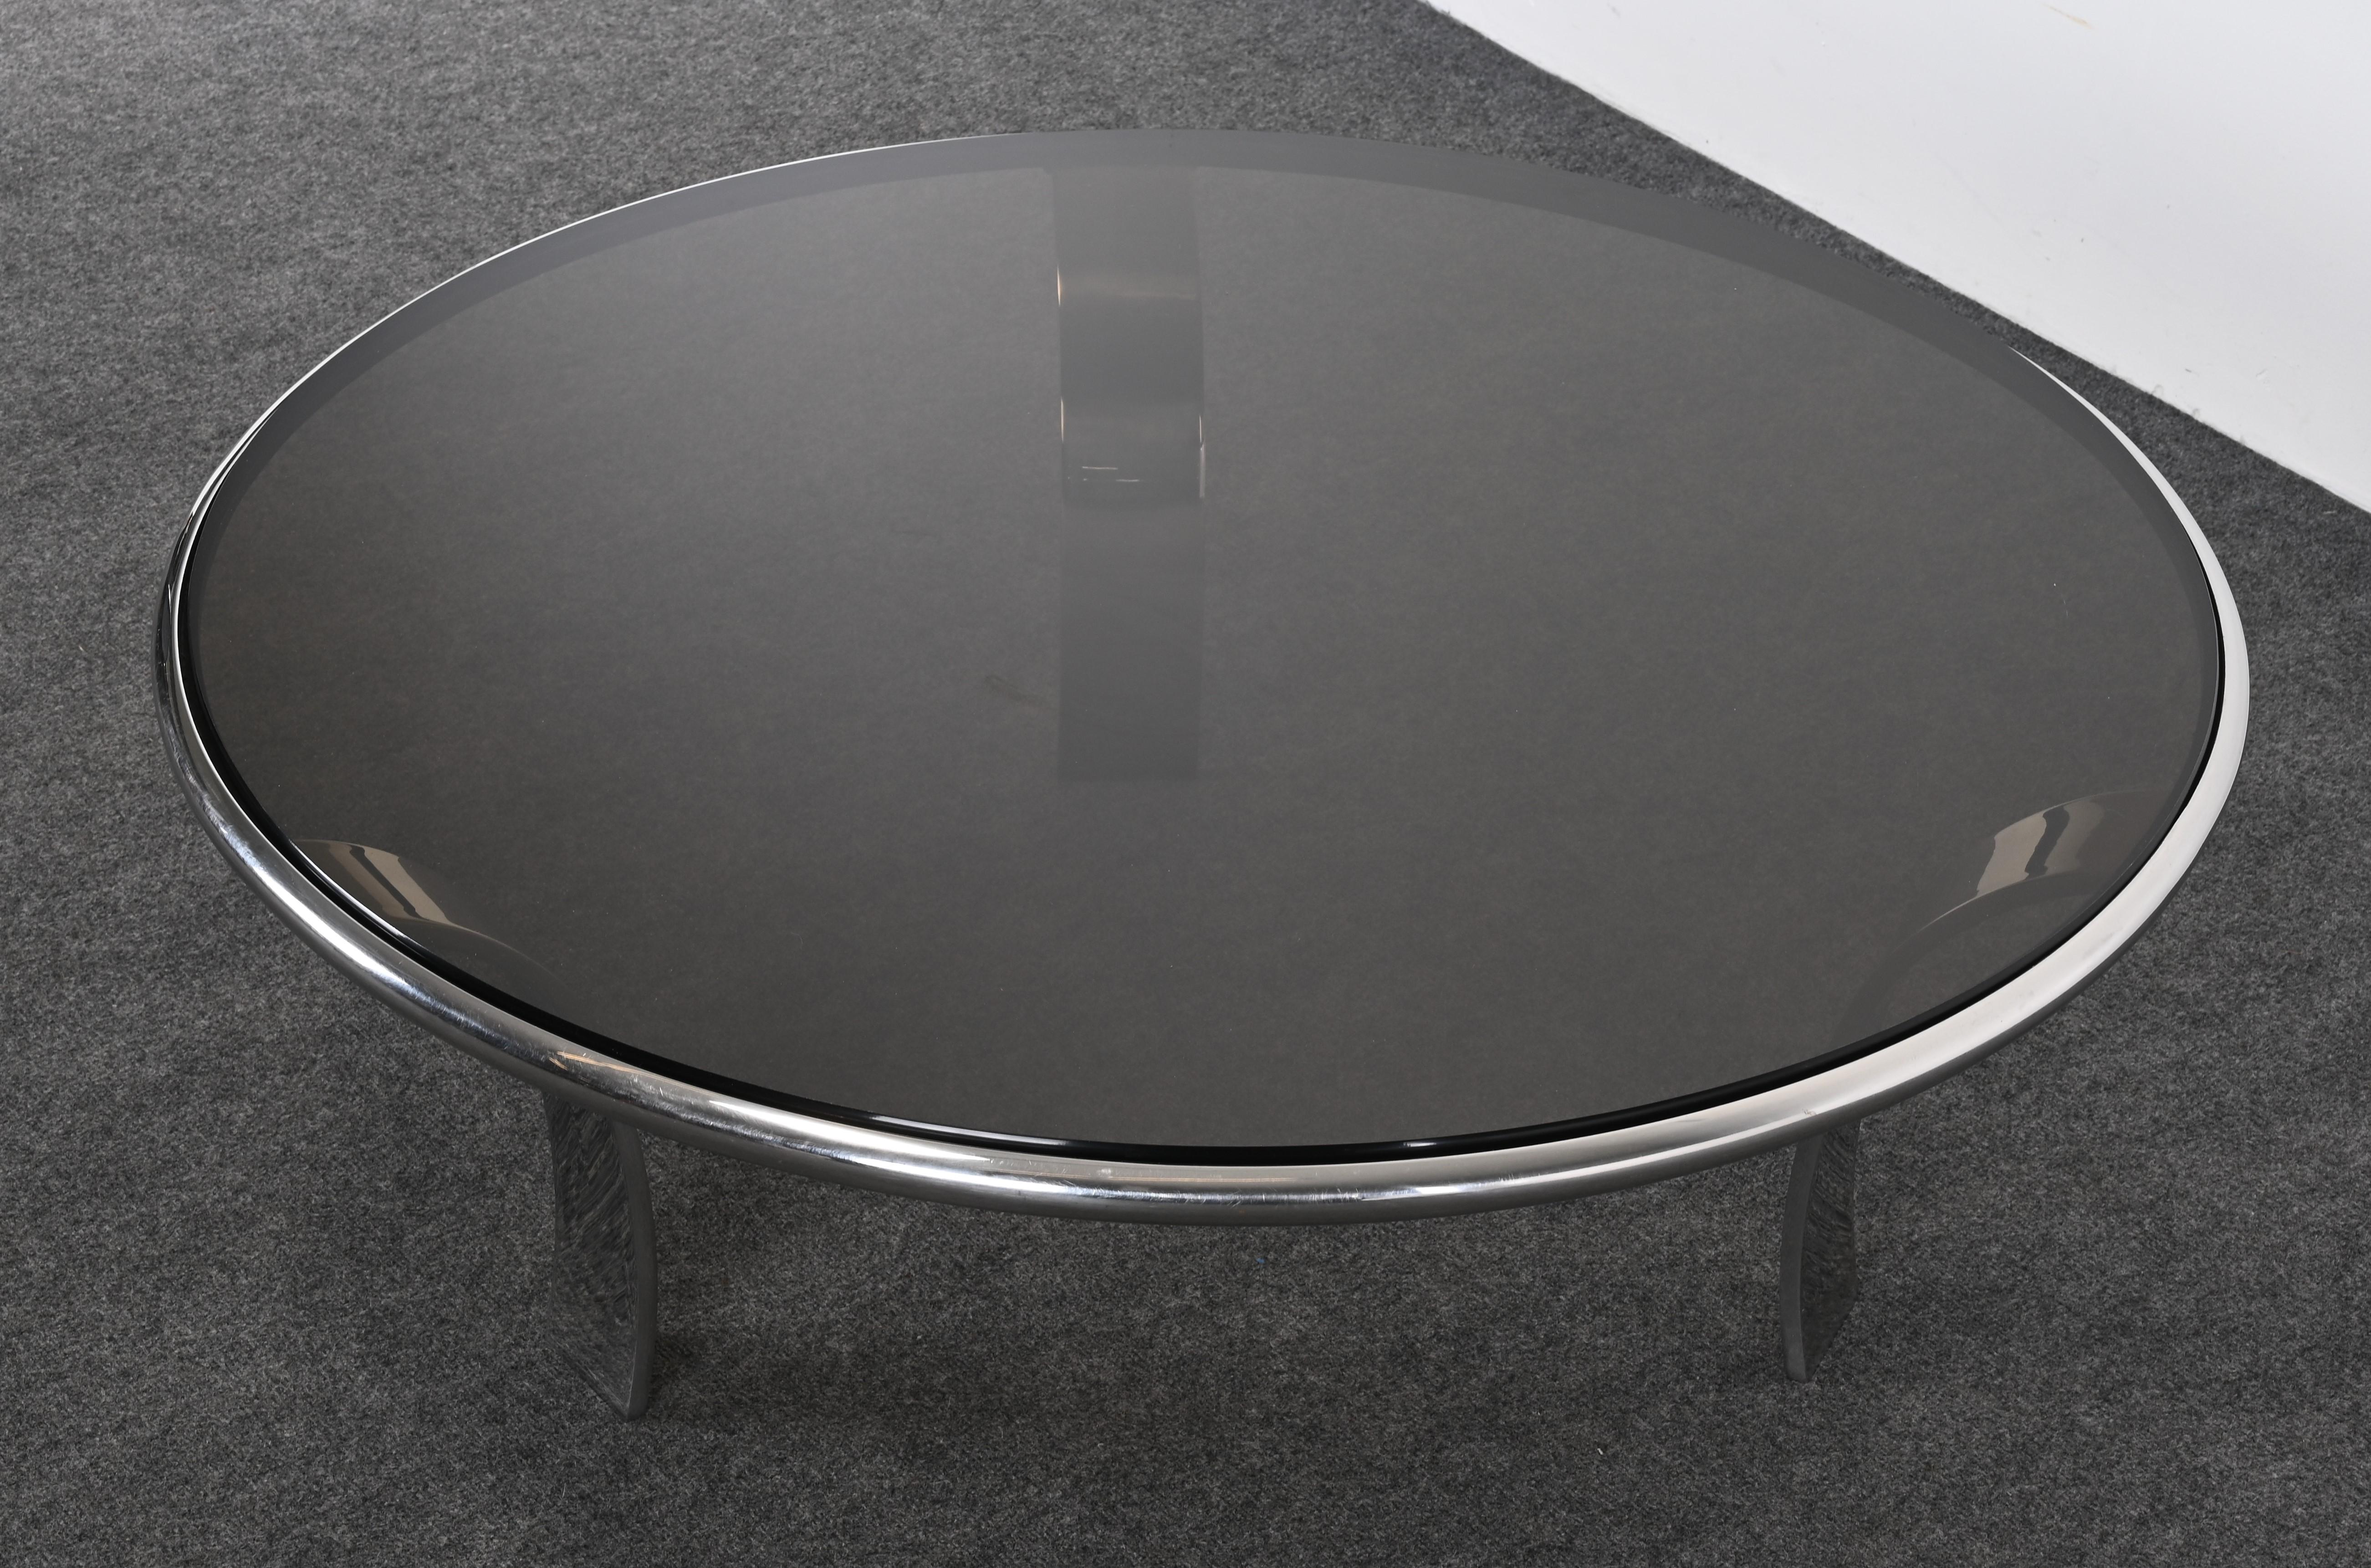 Stainless Steel Coffee Table by Steelcase Designed by Gardner Leaver, 1970s For Sale 2